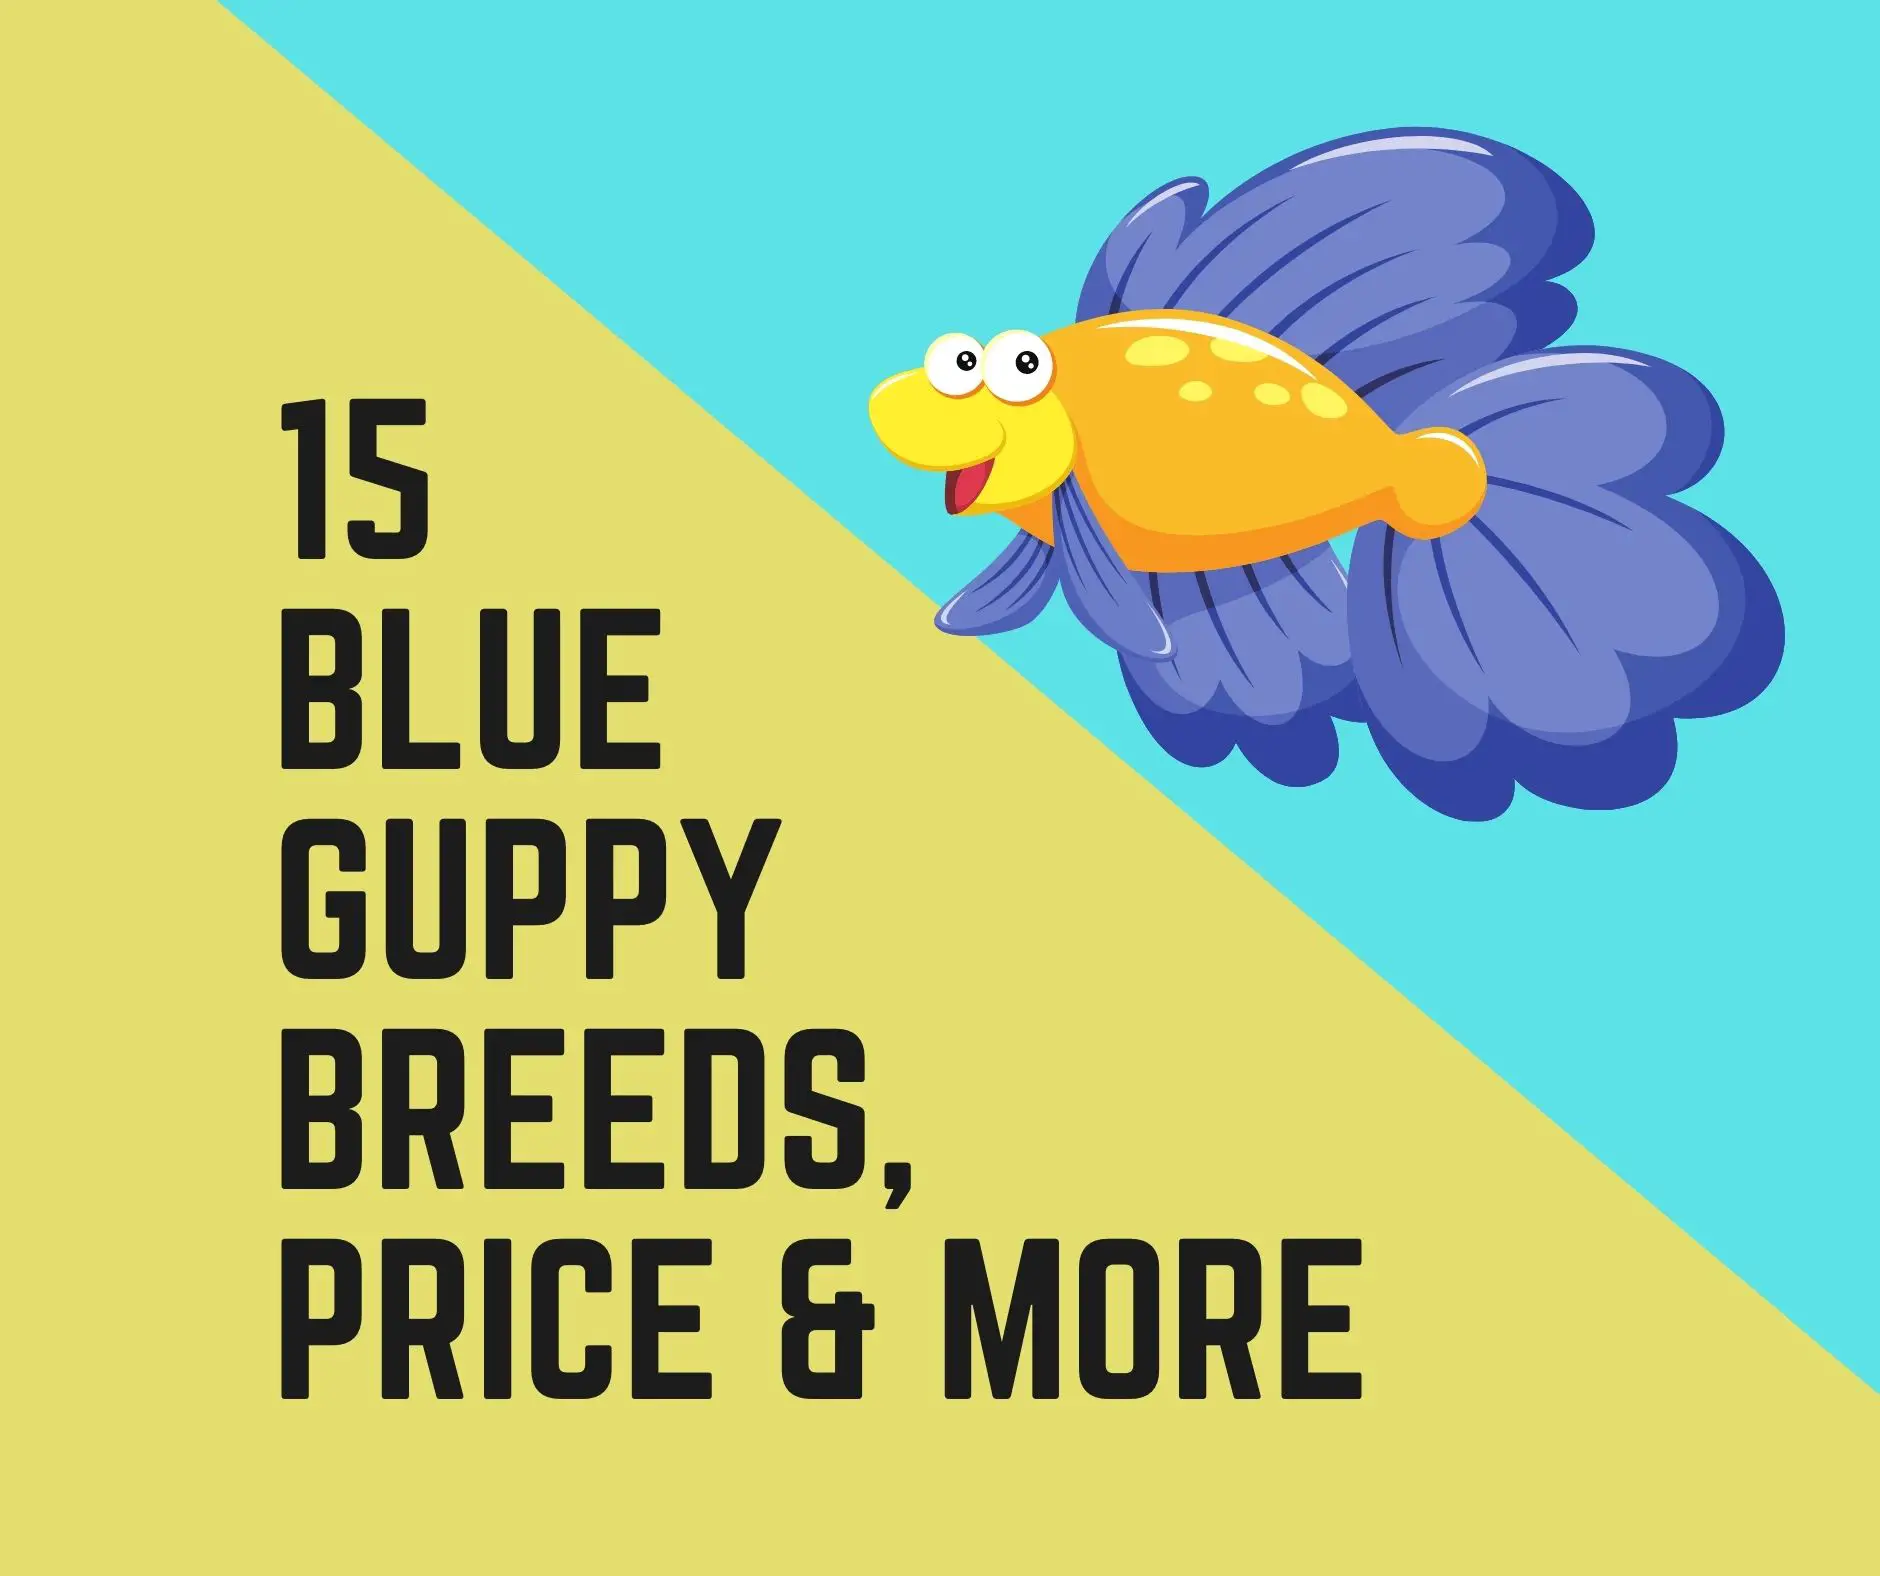 Blue Guppy Breeds and Price